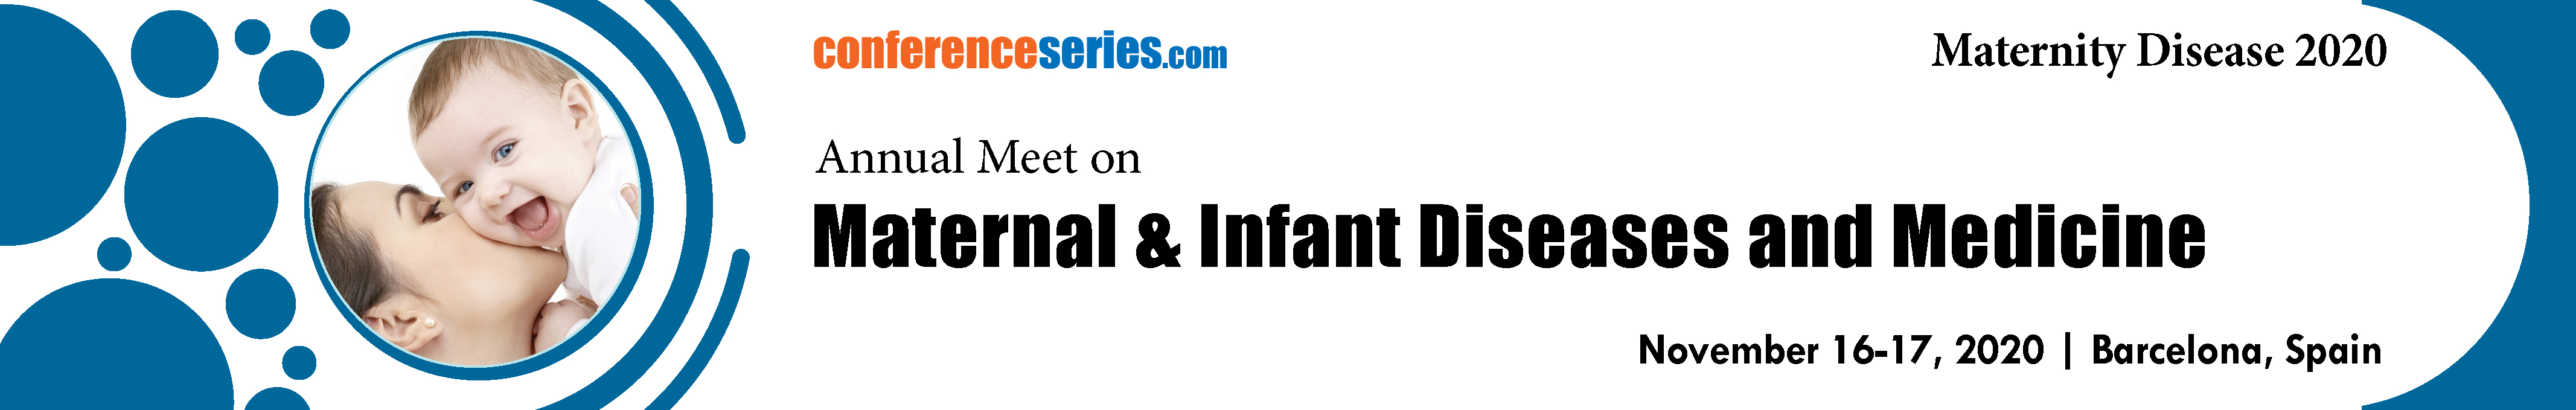 Annual Meet on Maternal & Infant Diseases and Medicine, Barcelona, Spain